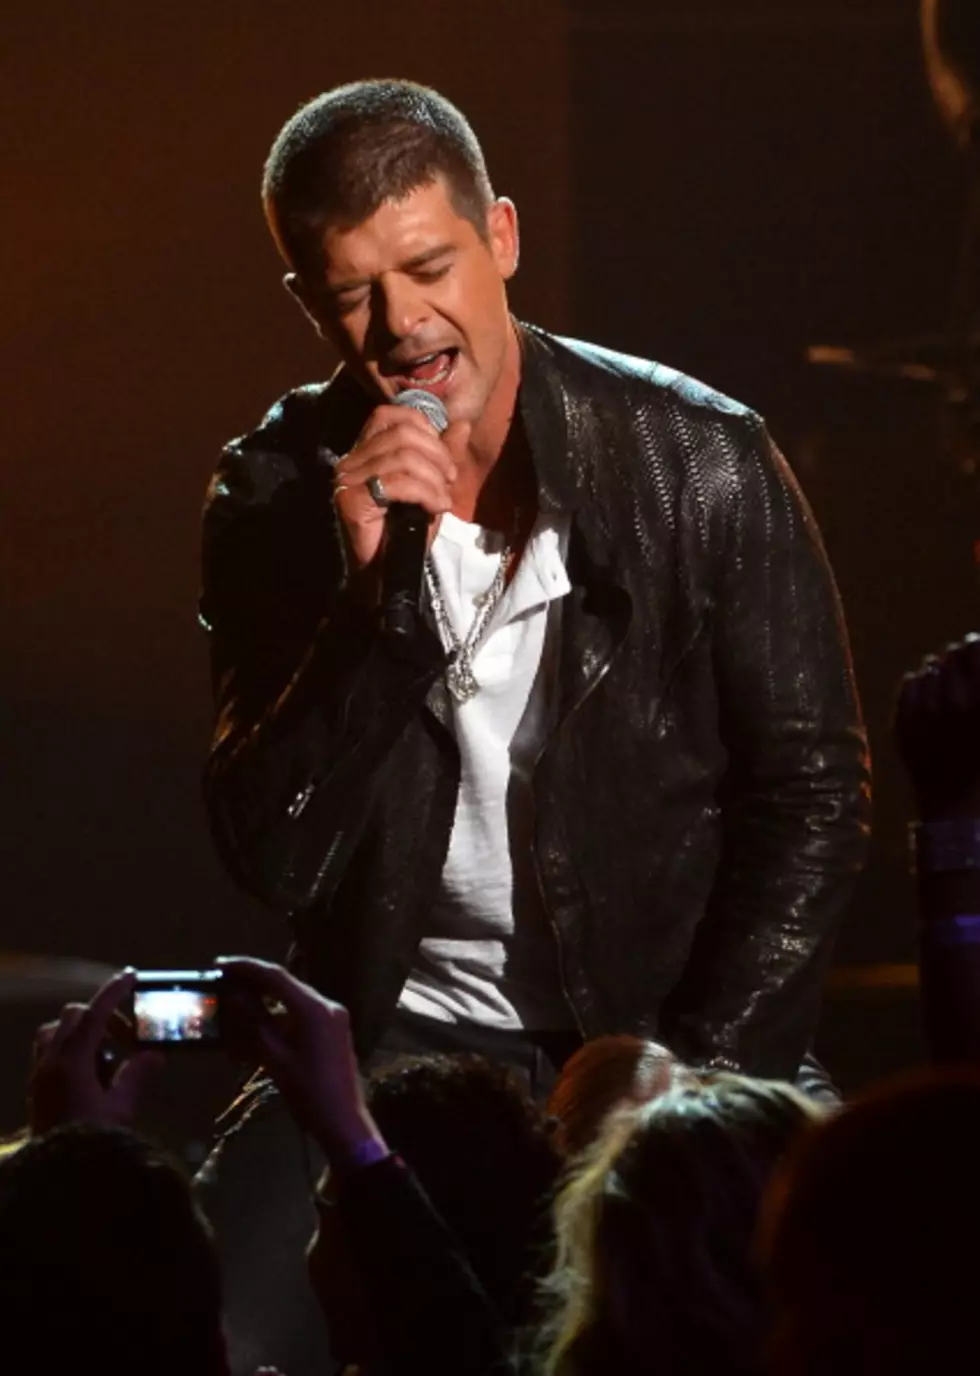 Robin Thicke Still Tryin’ to ‘Get Her Back’ [AUDIO/VIDEO]